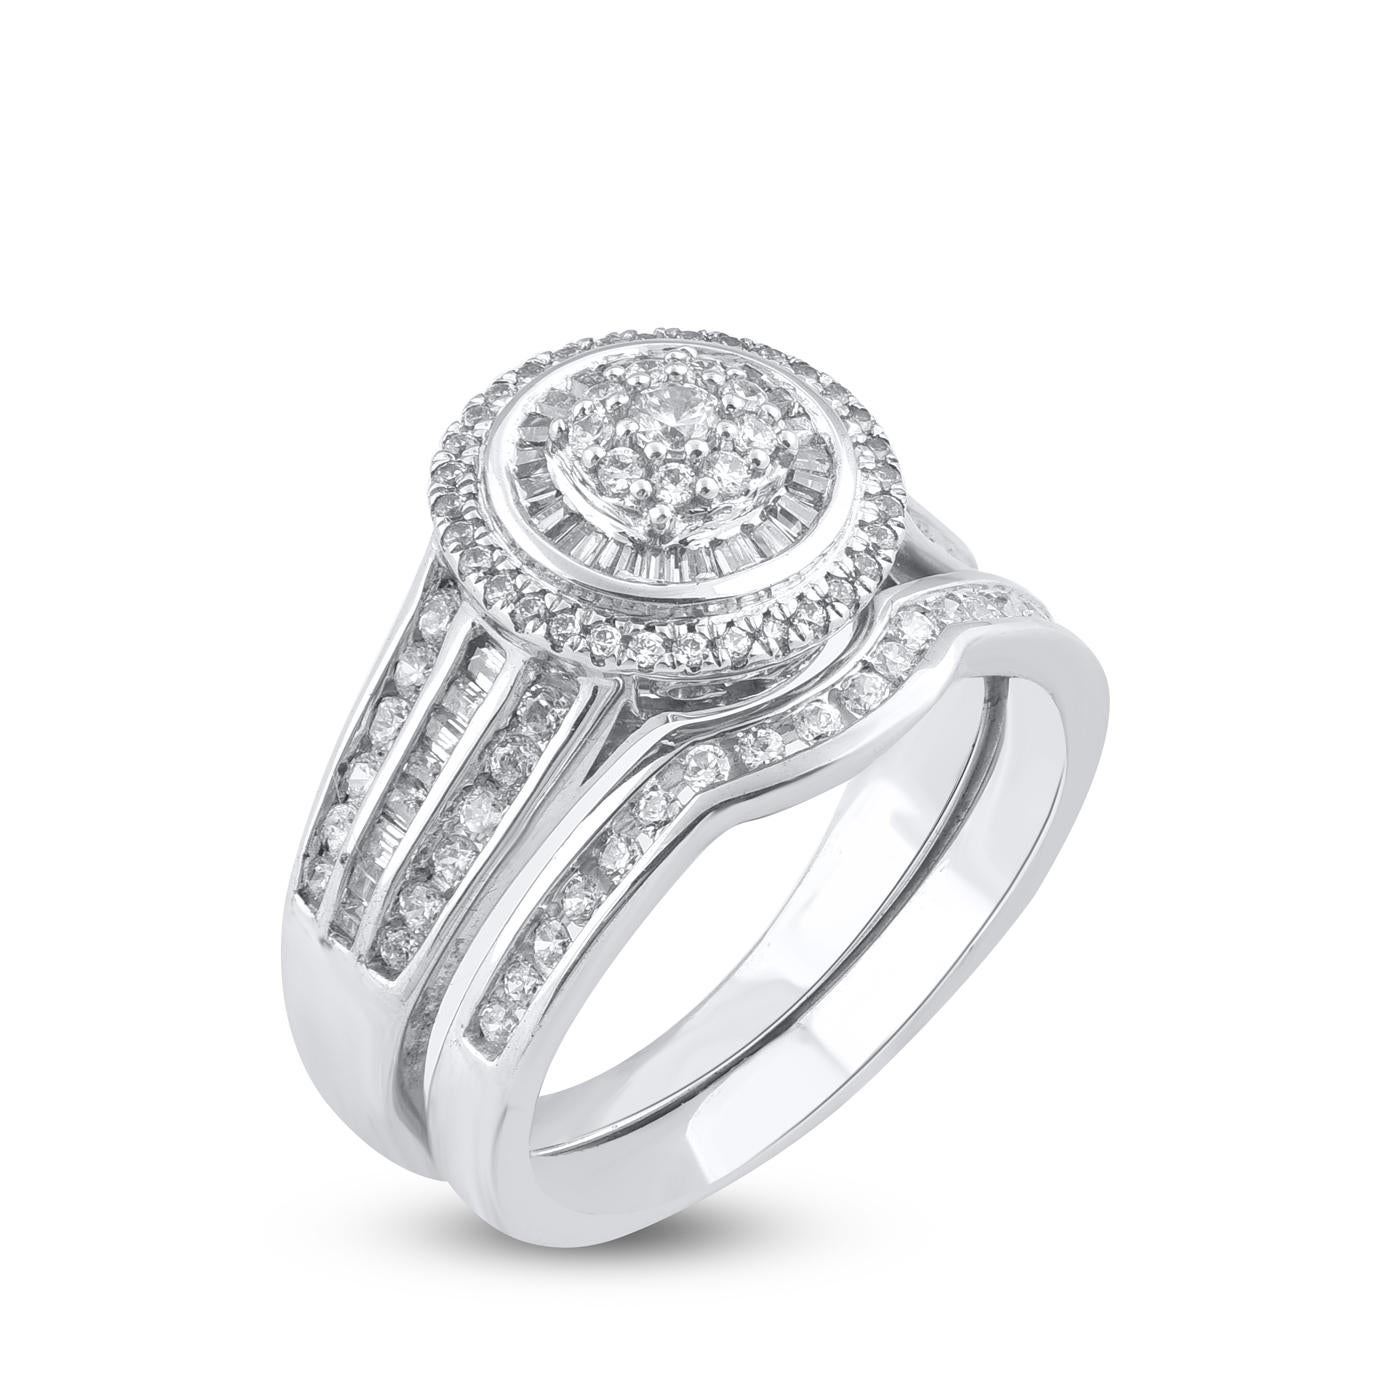 Bold and romantic, Give her a sophisticated reminder of your love with this diamond ring set. Crafted in 14 Karat white gold. This wedding ring features a sparkling 132 brilliant cut, single cut round diamonds and baguette cut diamonds beautifully